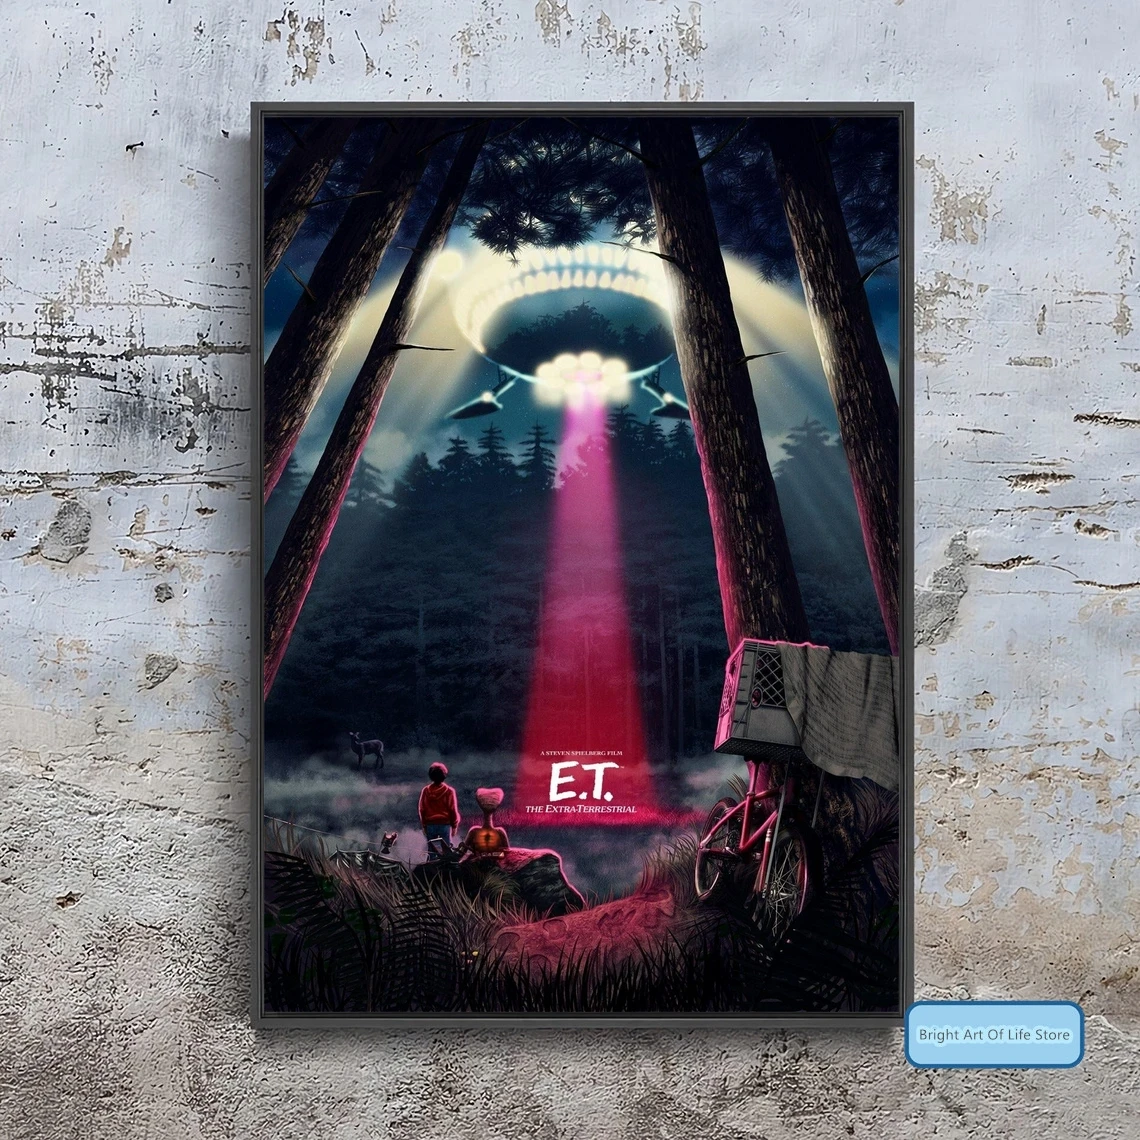 

E.T. the Extra-Terrestrial (1982) Movie Poster Cover Photo Canvas Print Wall Art Home Decor (Unframed)